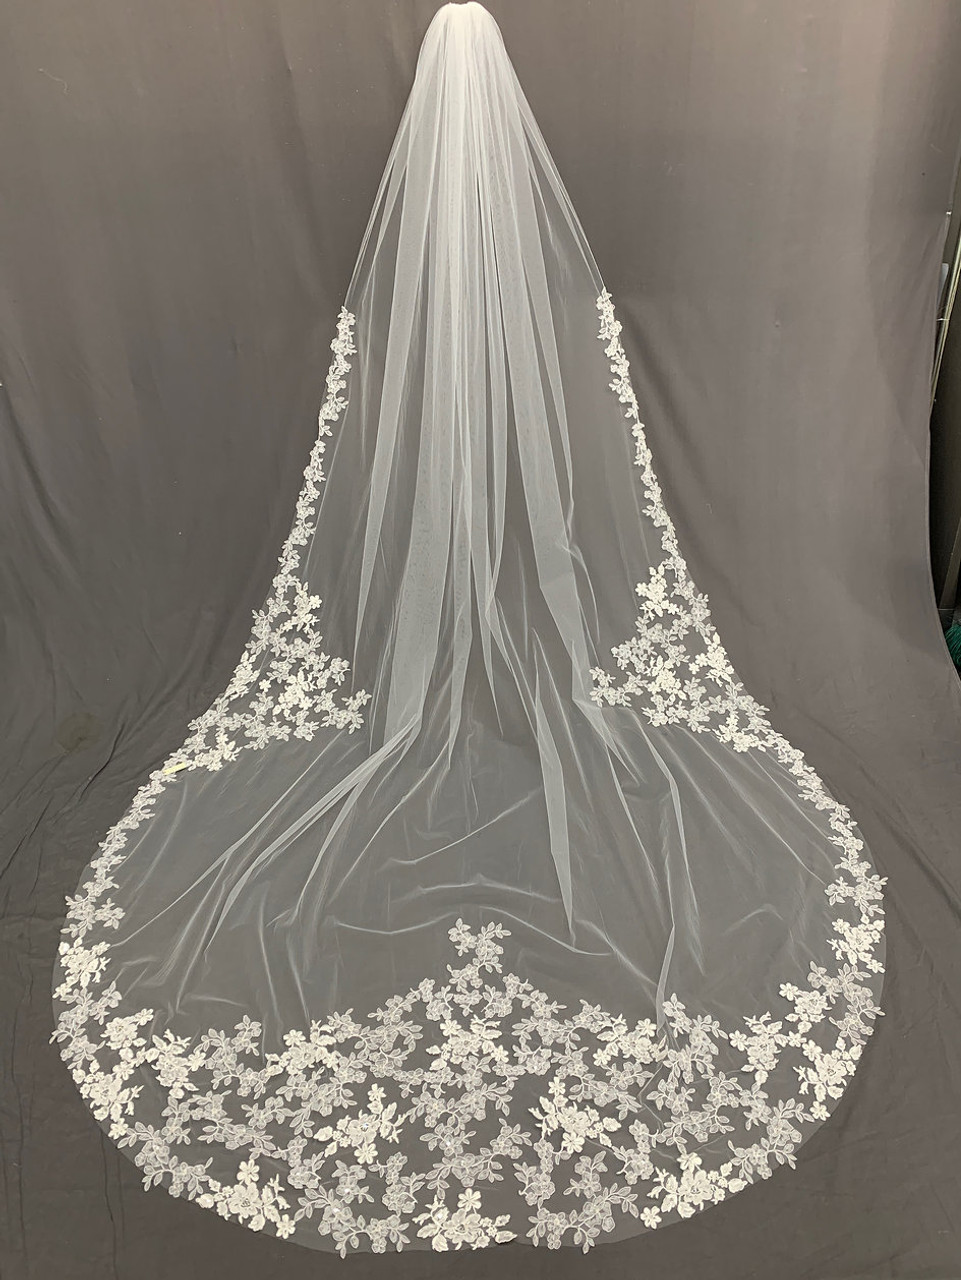 LKY Royal Cathedral Veil VM 3170 -  Heavily sewn and soft sewn lace - 126" Inches Long - Fast Ship